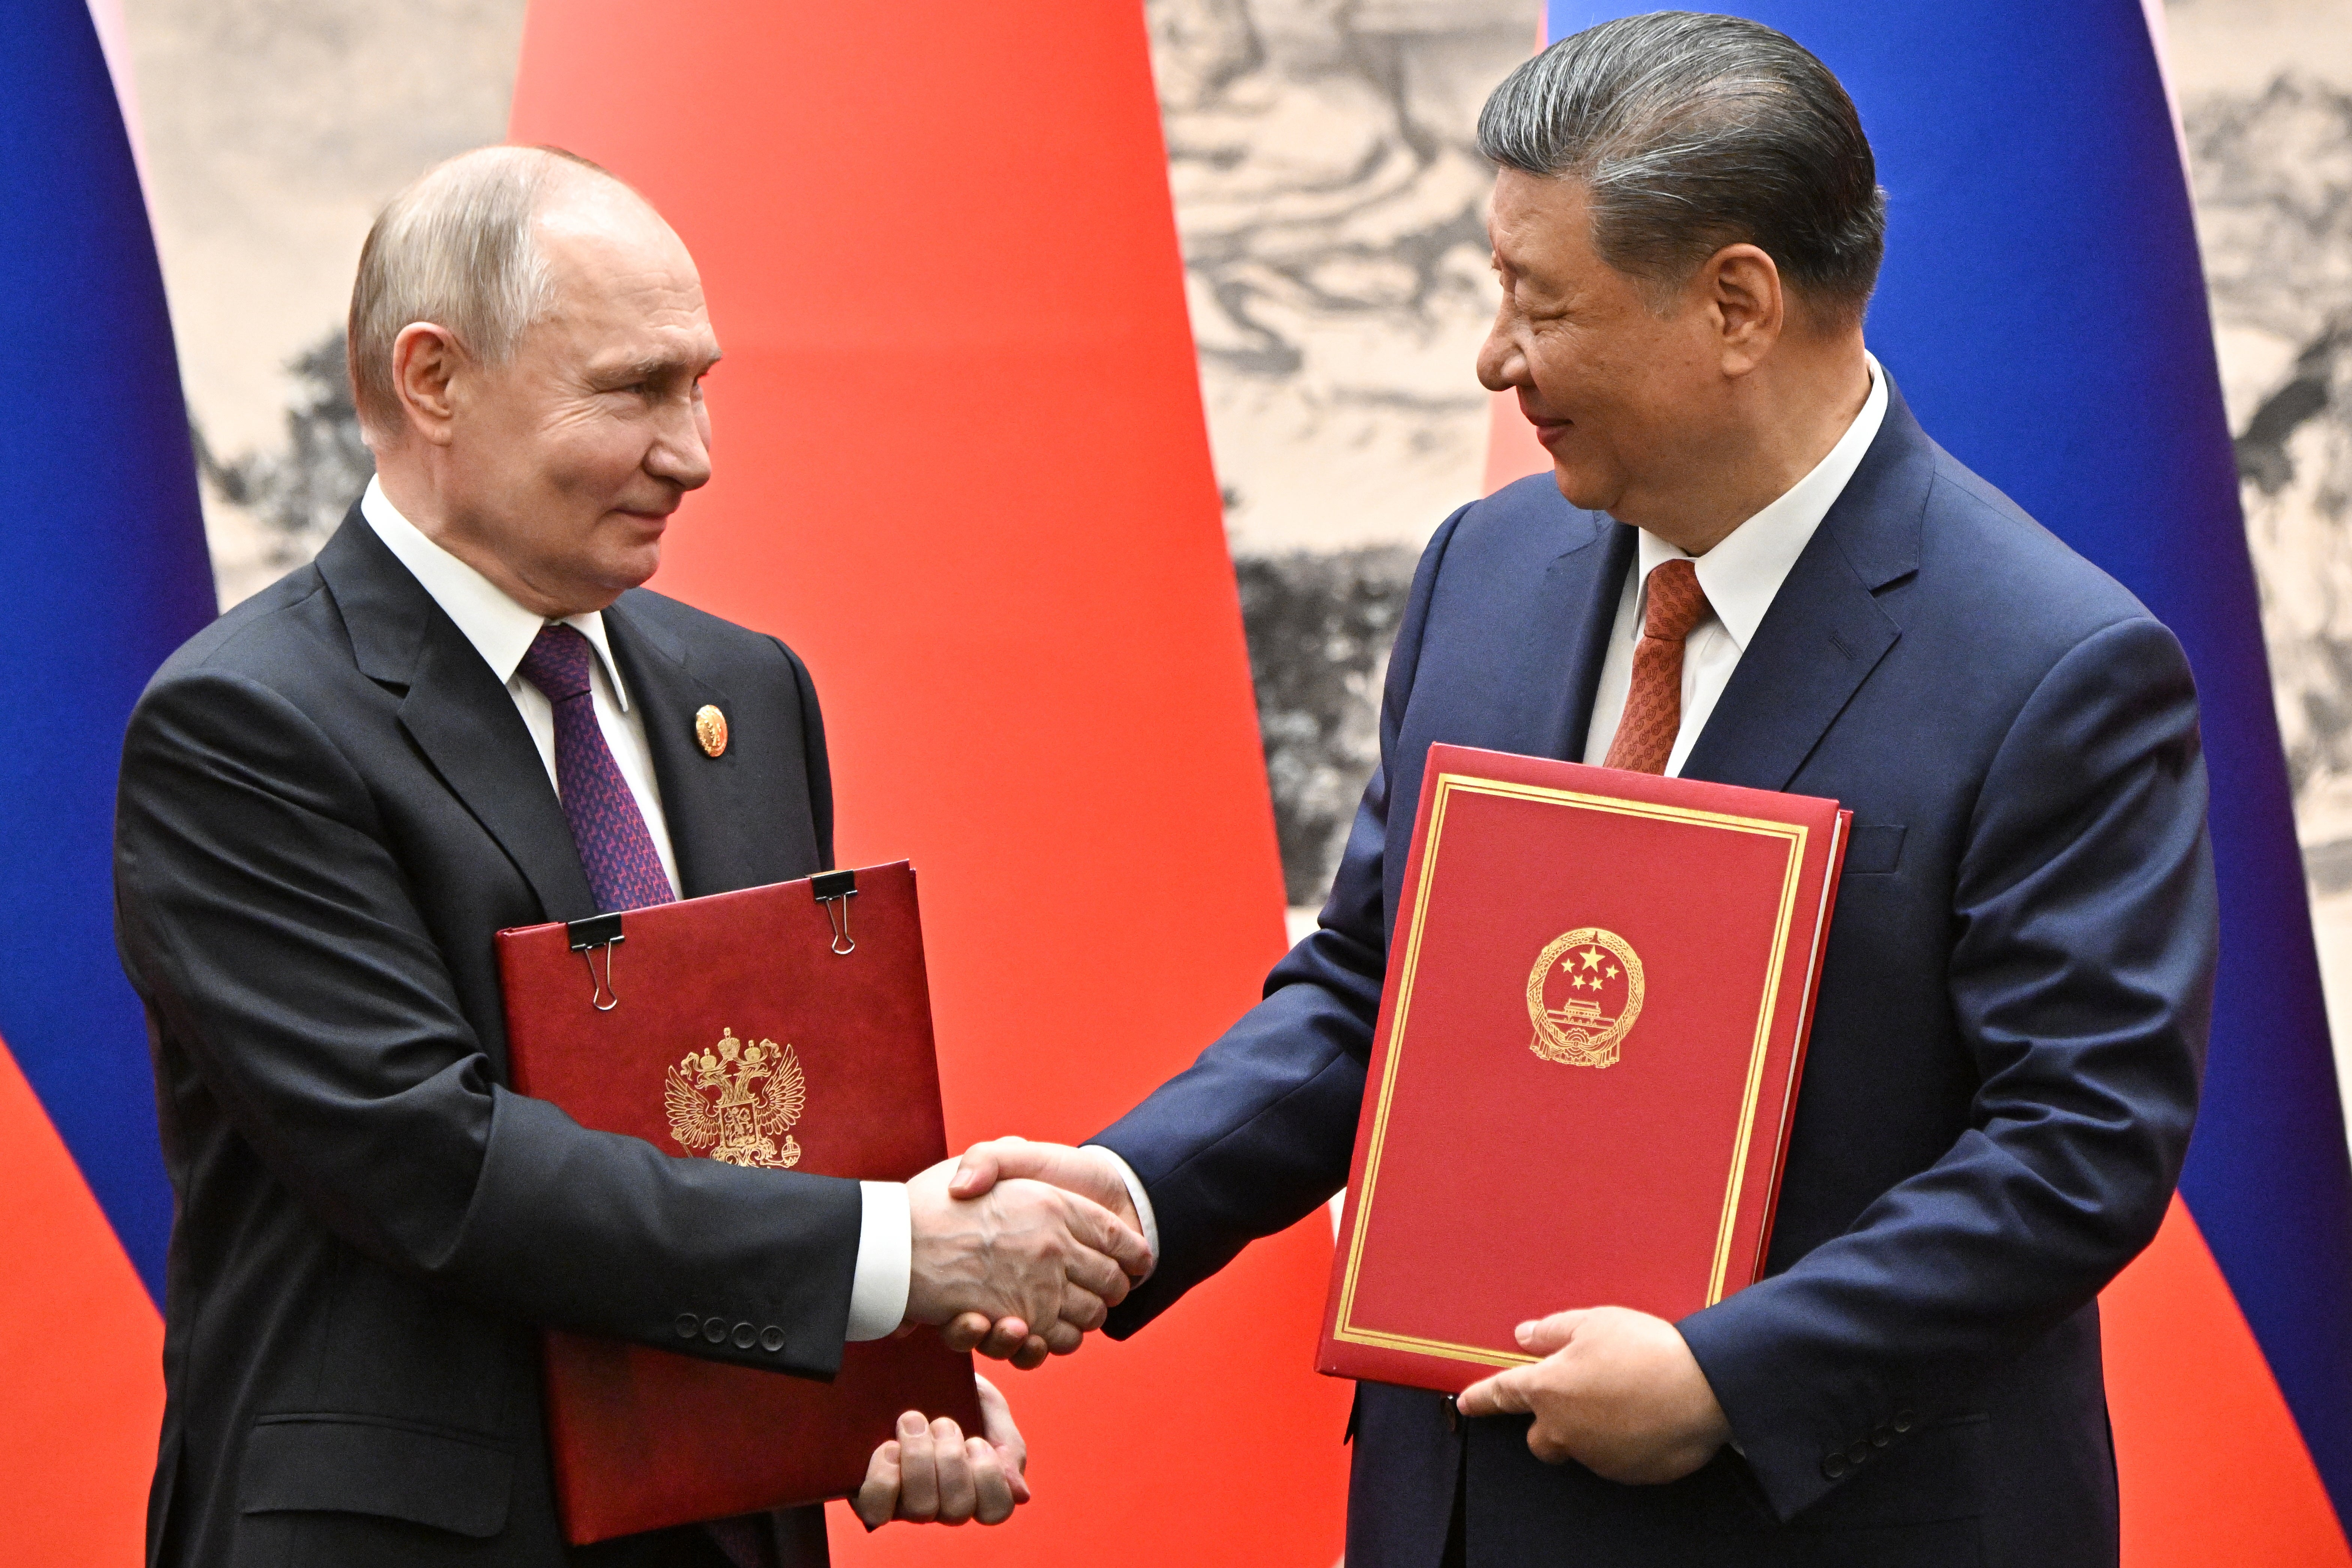 Russian President Vladimir Putin (L) and Chinese President Xi Jinping shake hands as they attend a signing ceremony following a meeting in expanded format at the Great Hall of the People